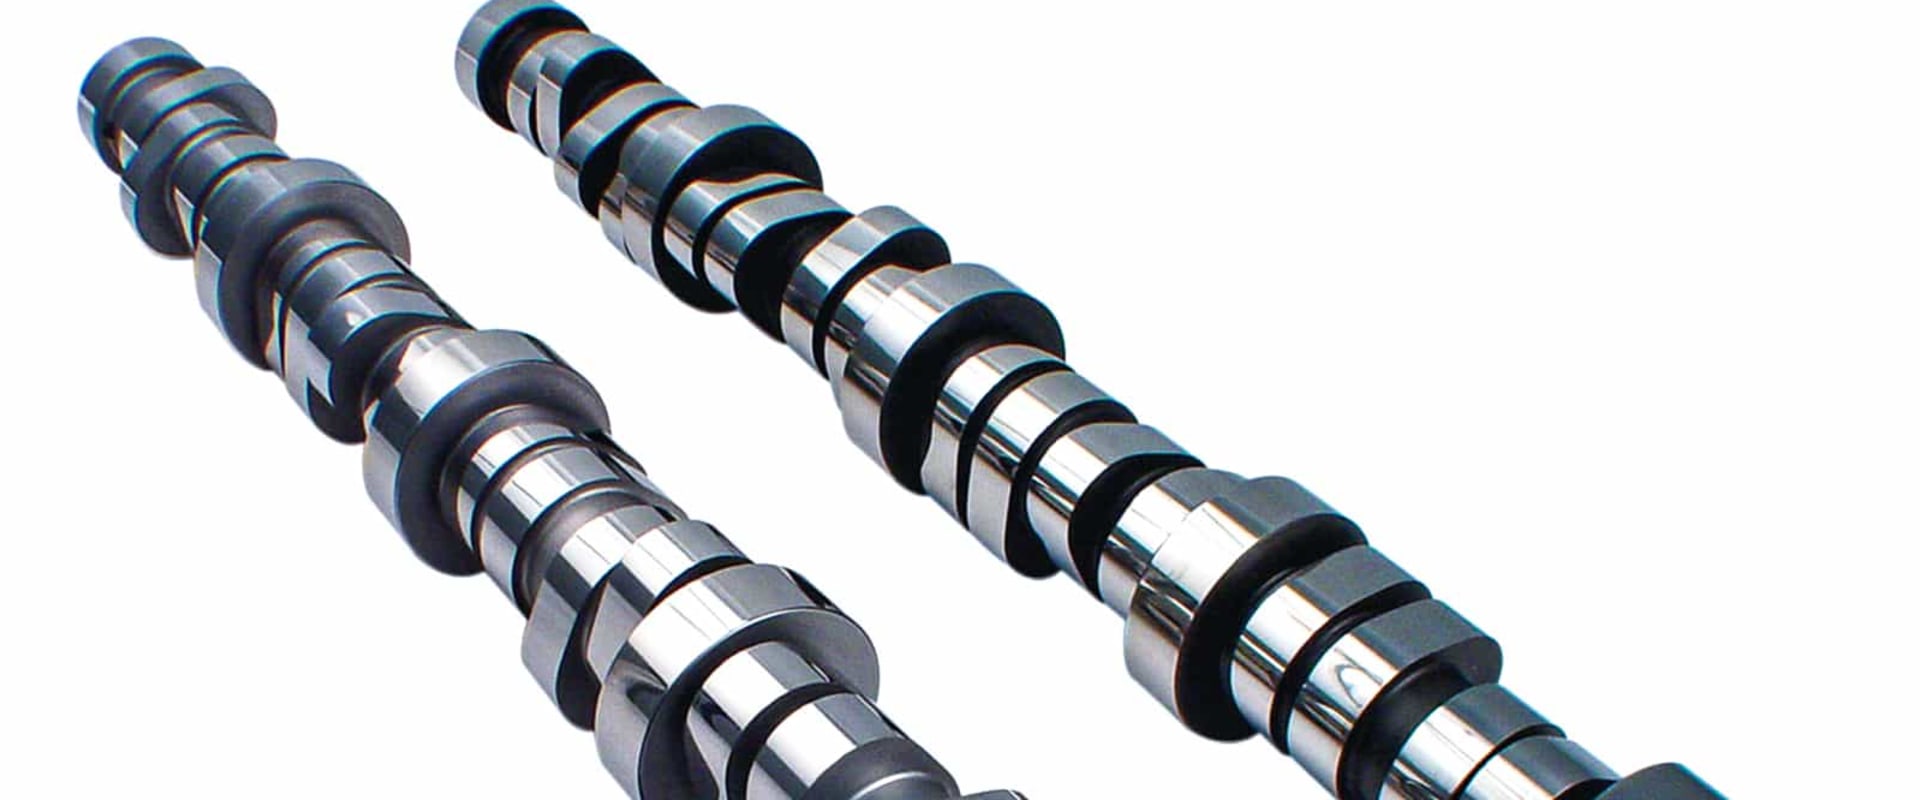 Everything You Need to Know About Camshafts for Sale